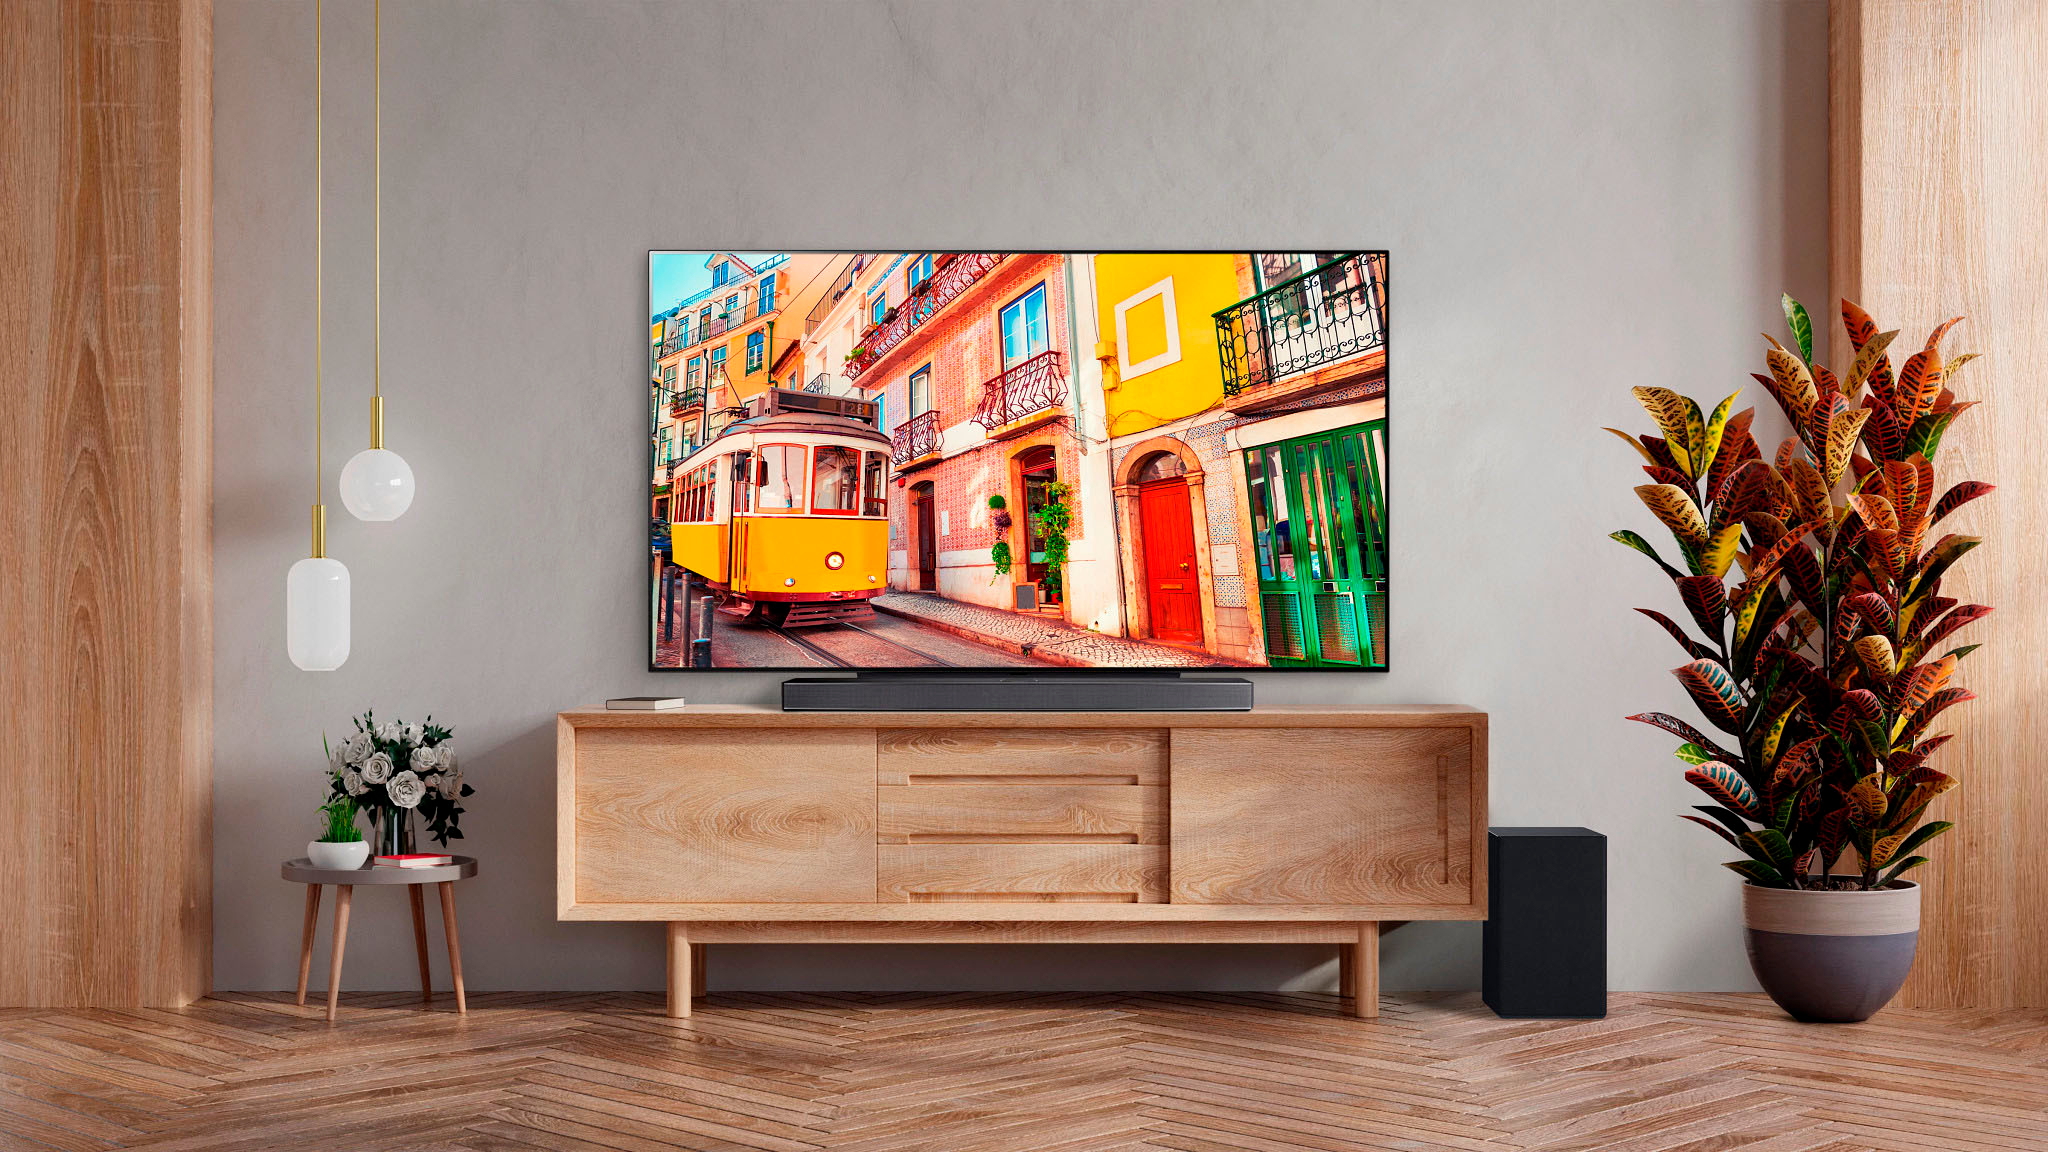  LG C3 Series 55-Inch Class OLED evo Smart TV OLED55C3PUA, 2023  - AI-Powered 4K, Alexa Built-in Sound Bar C 3.1.3ch Perfect Matching for  OLED C TV with IMAX Enhanced and Dolby